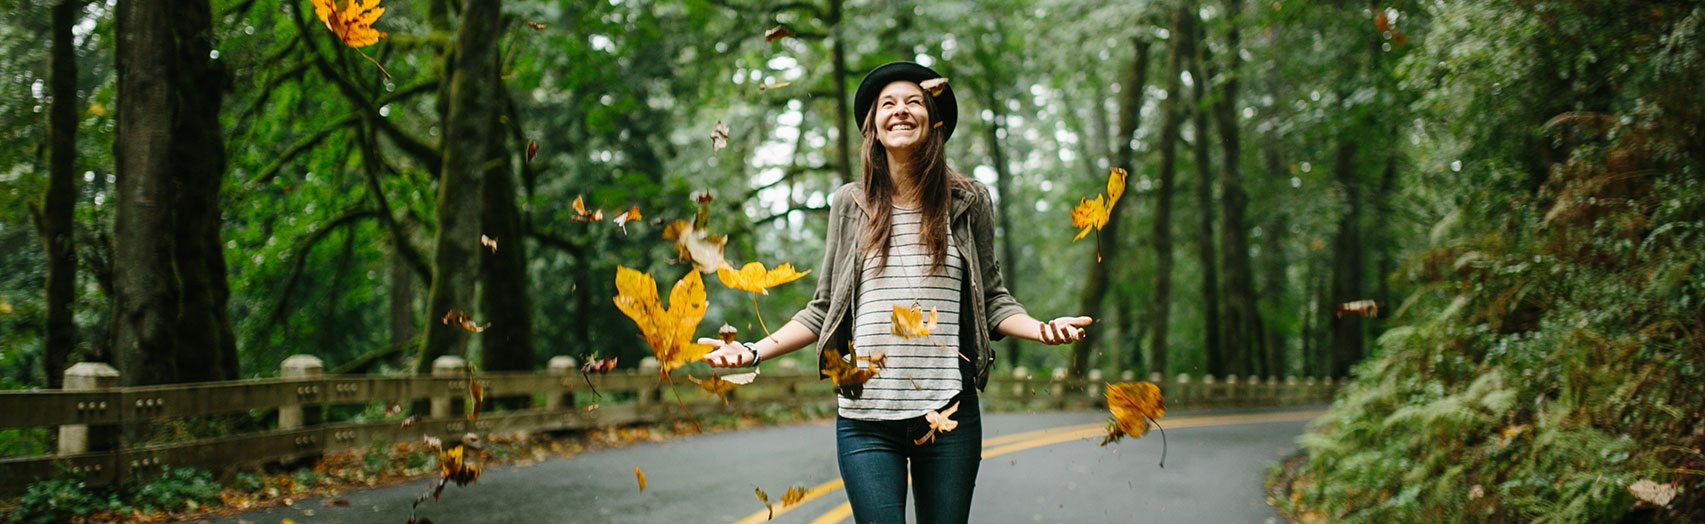 8 Ways to Stay Well in Fall